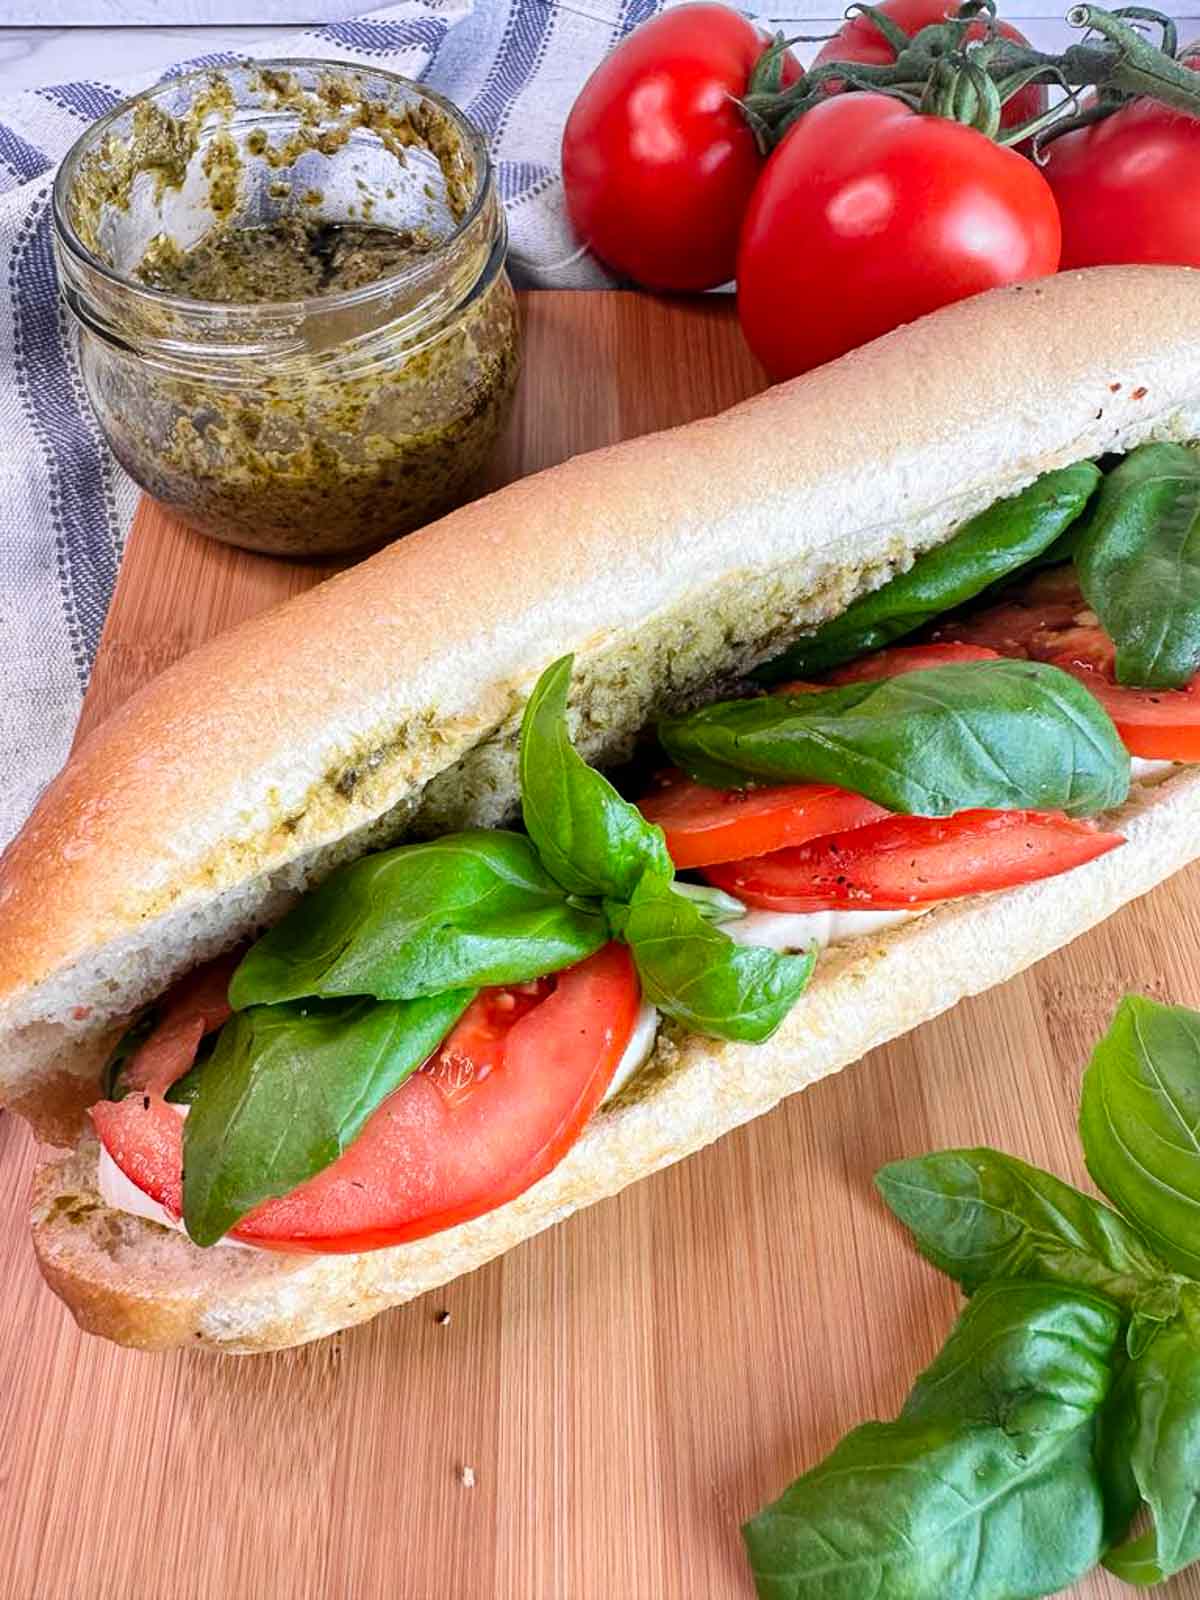 A baguette caprese sandwich with pesto is a delicious and easy lunch or dinner